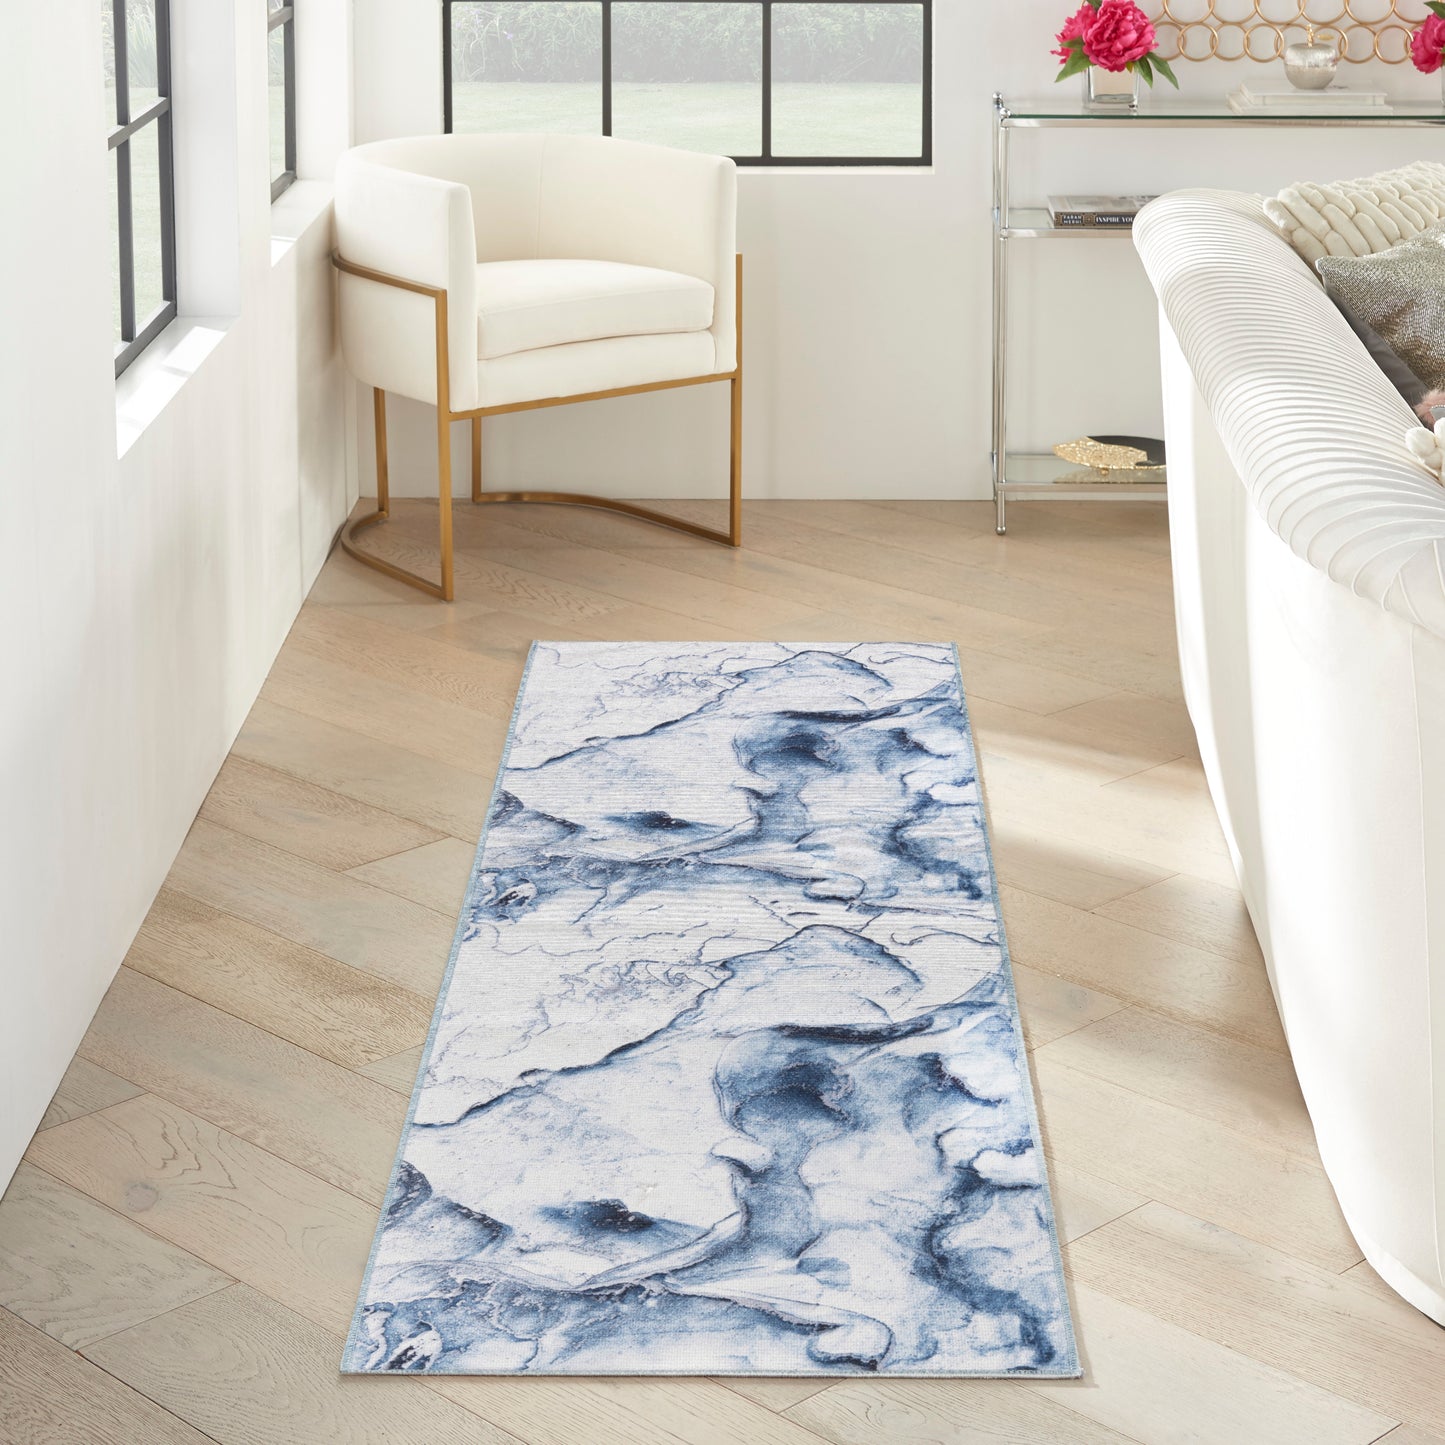 Inspire Me! Home Décor Daydream DDR01 Ivory Blue  Contemporary Machinemade Rug